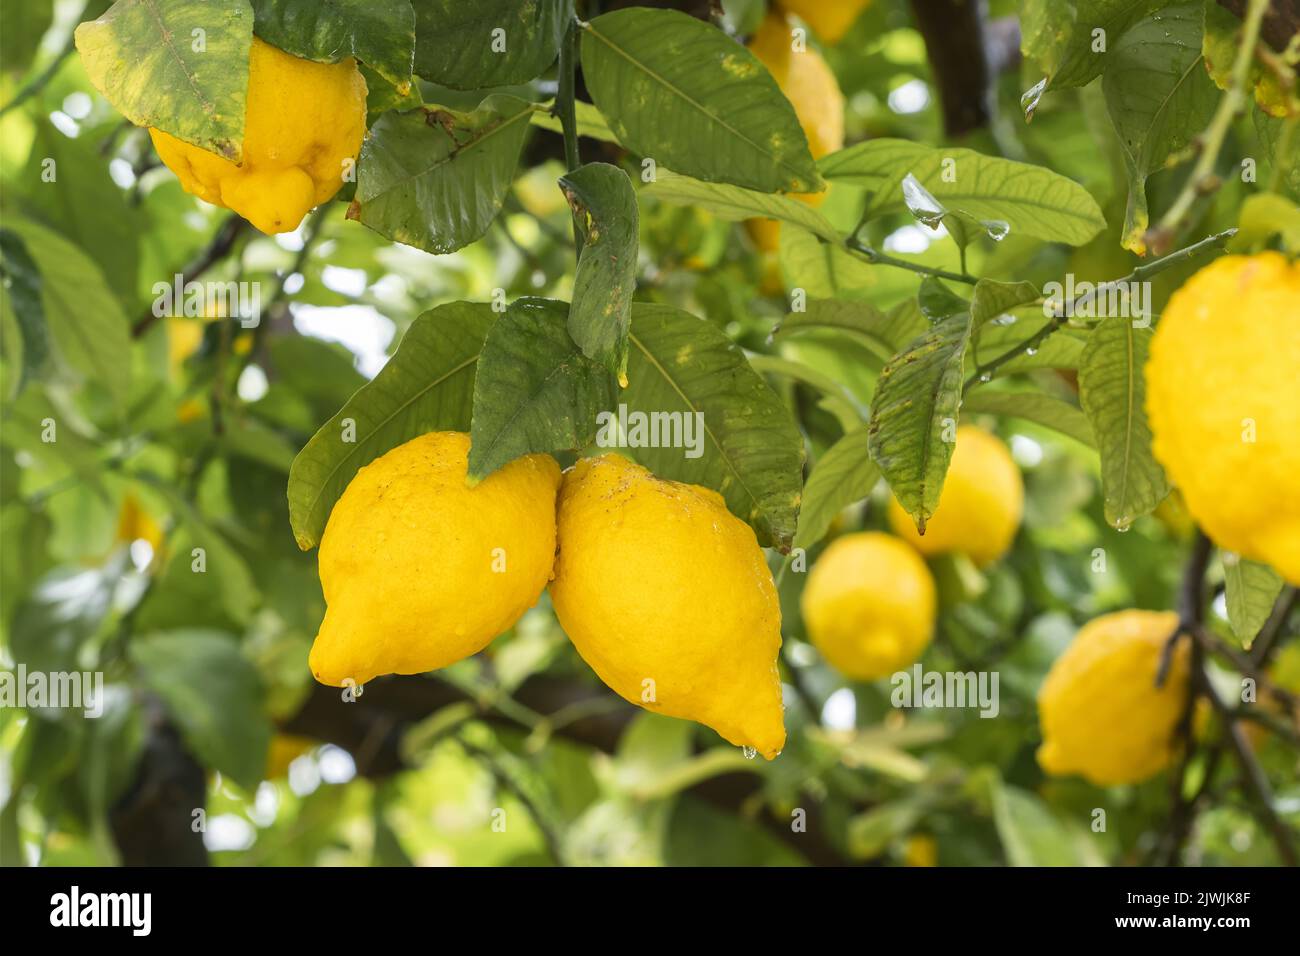 Ripe yellow lemons in water drops after the rain hanging on a branch Stock Photo